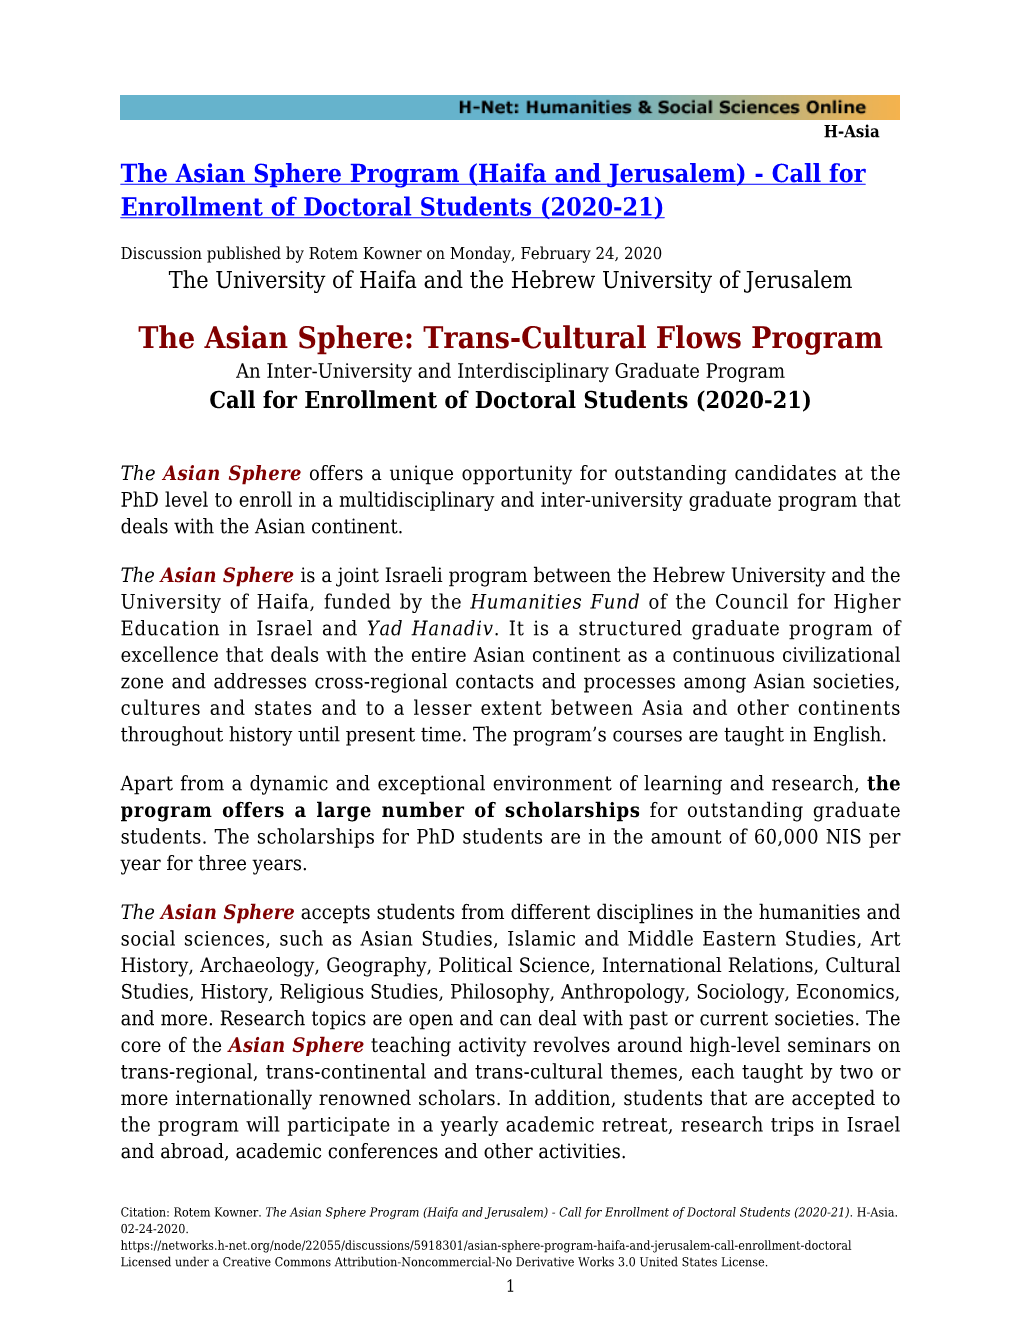 The Asian Sphere Program (Haifa and Jerusalem) - Call for Enrollment of Doctoral Students (2020-21)